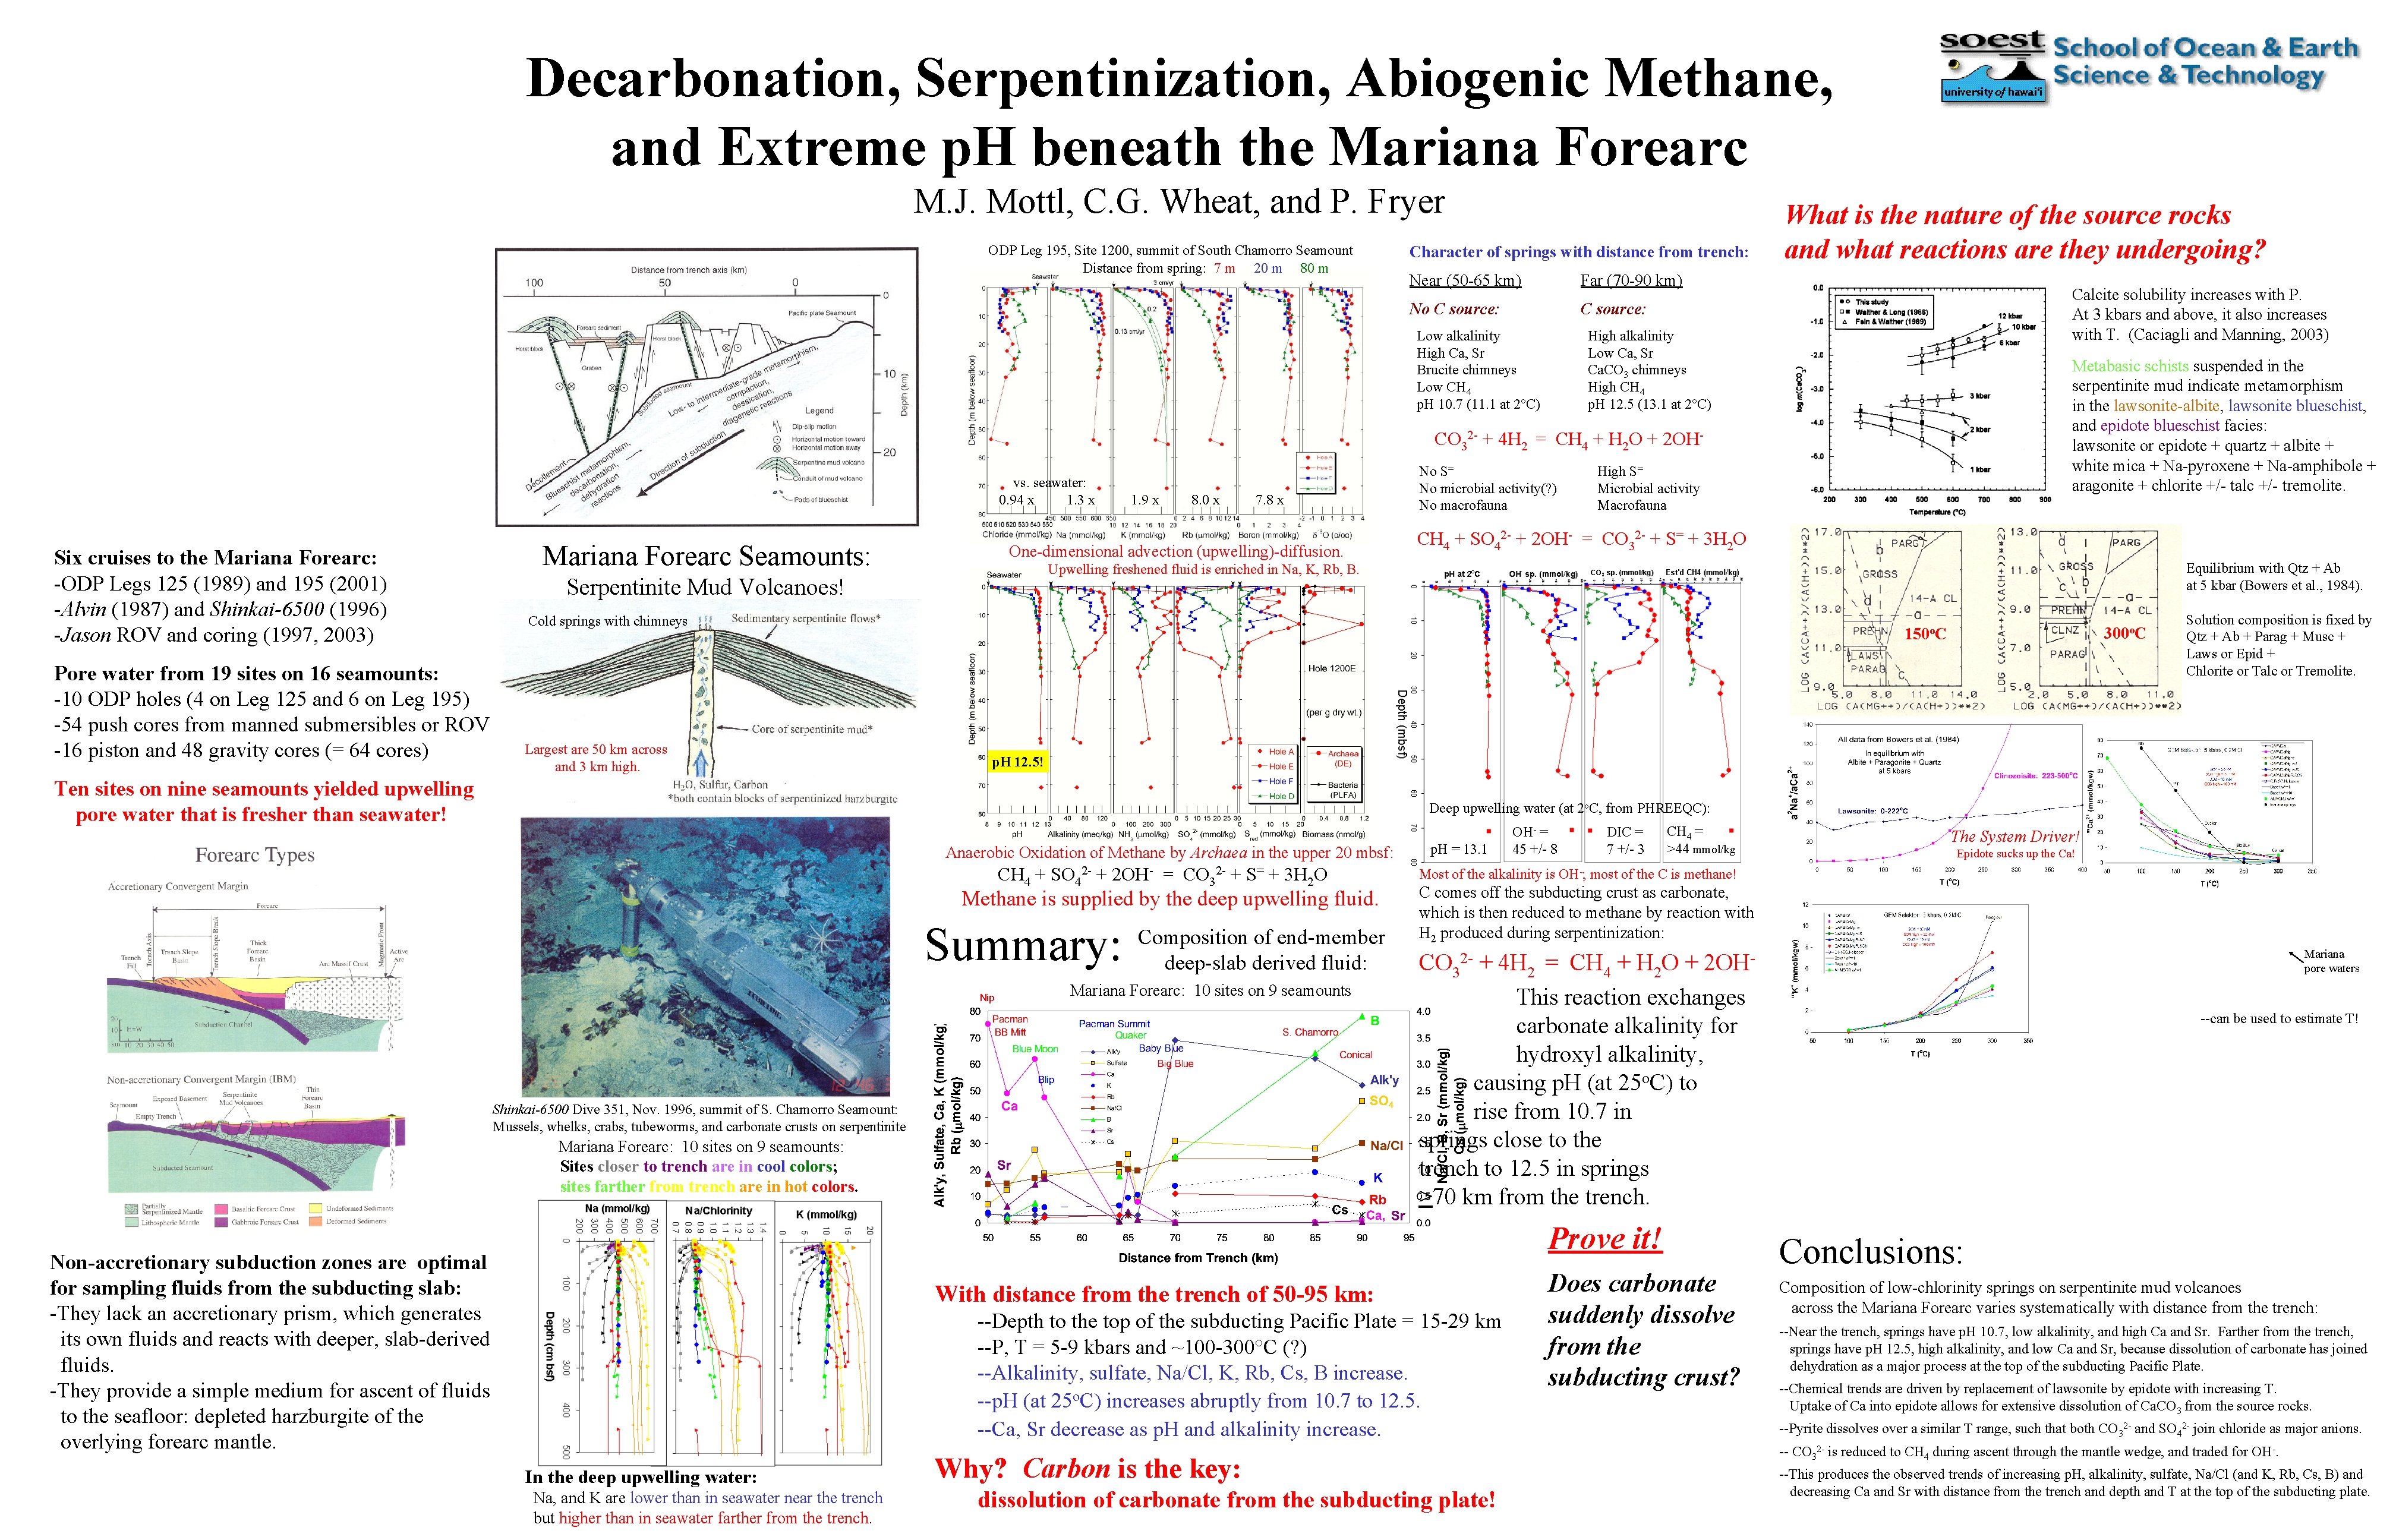 Decarbonation, Serpentinization, Abiogenic Methane, and Extreme p. H beneath the Mariana Forearc M. J.